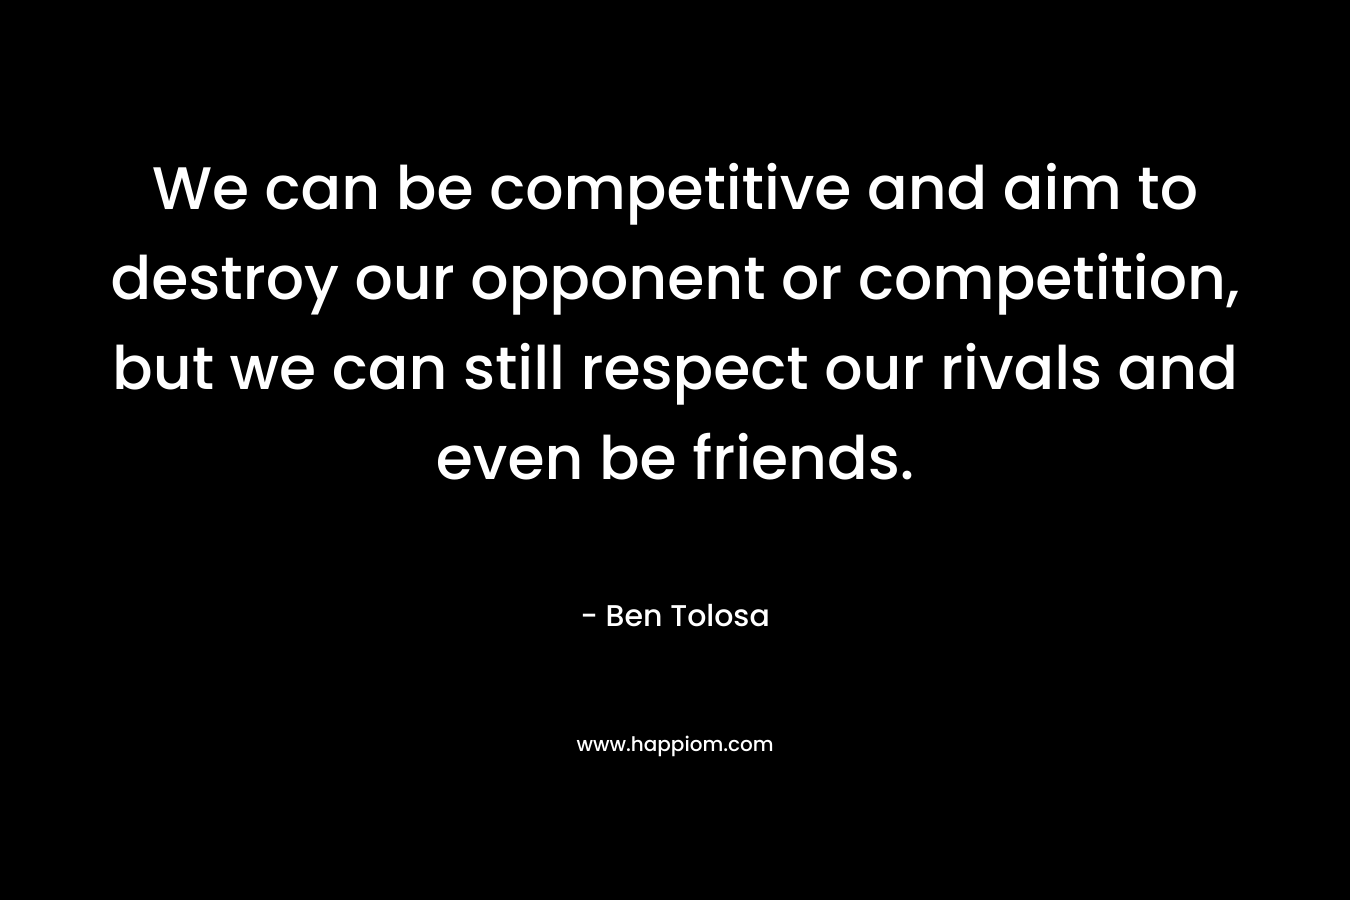 We can be competitive and aim to destroy our opponent or competition, but we can still respect our rivals and even be friends. – Ben Tolosa